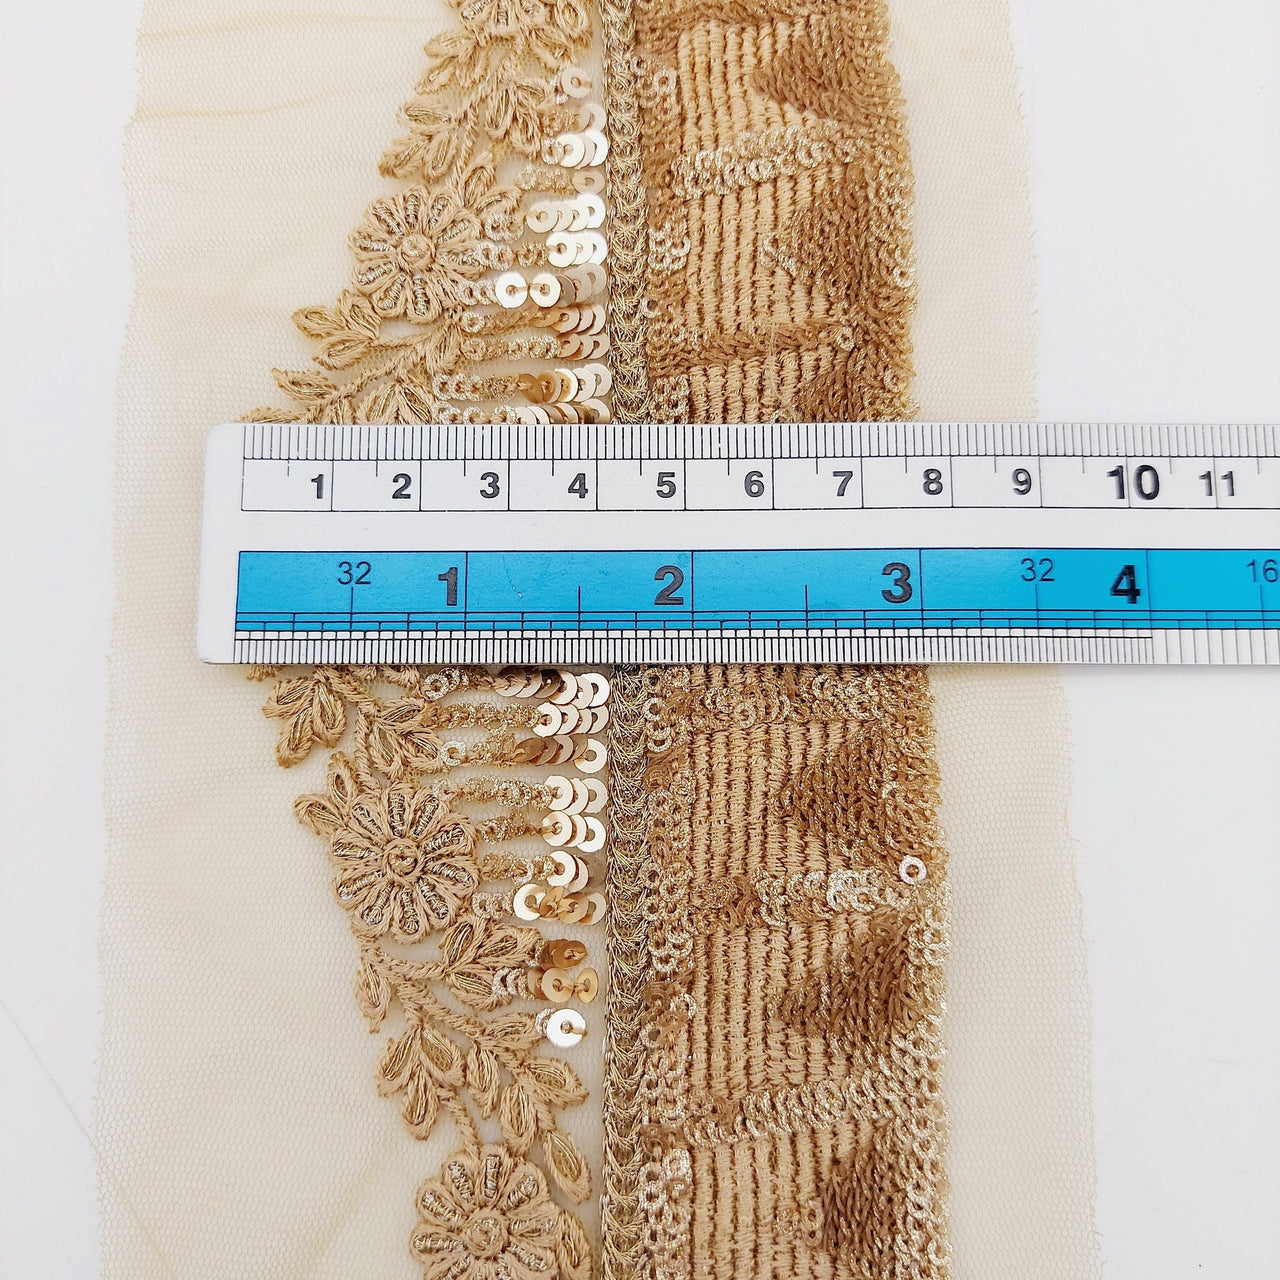 Gold Net Lace Trim with Floral Embroidery and Sequins, Sari Border, Embroidered Trim